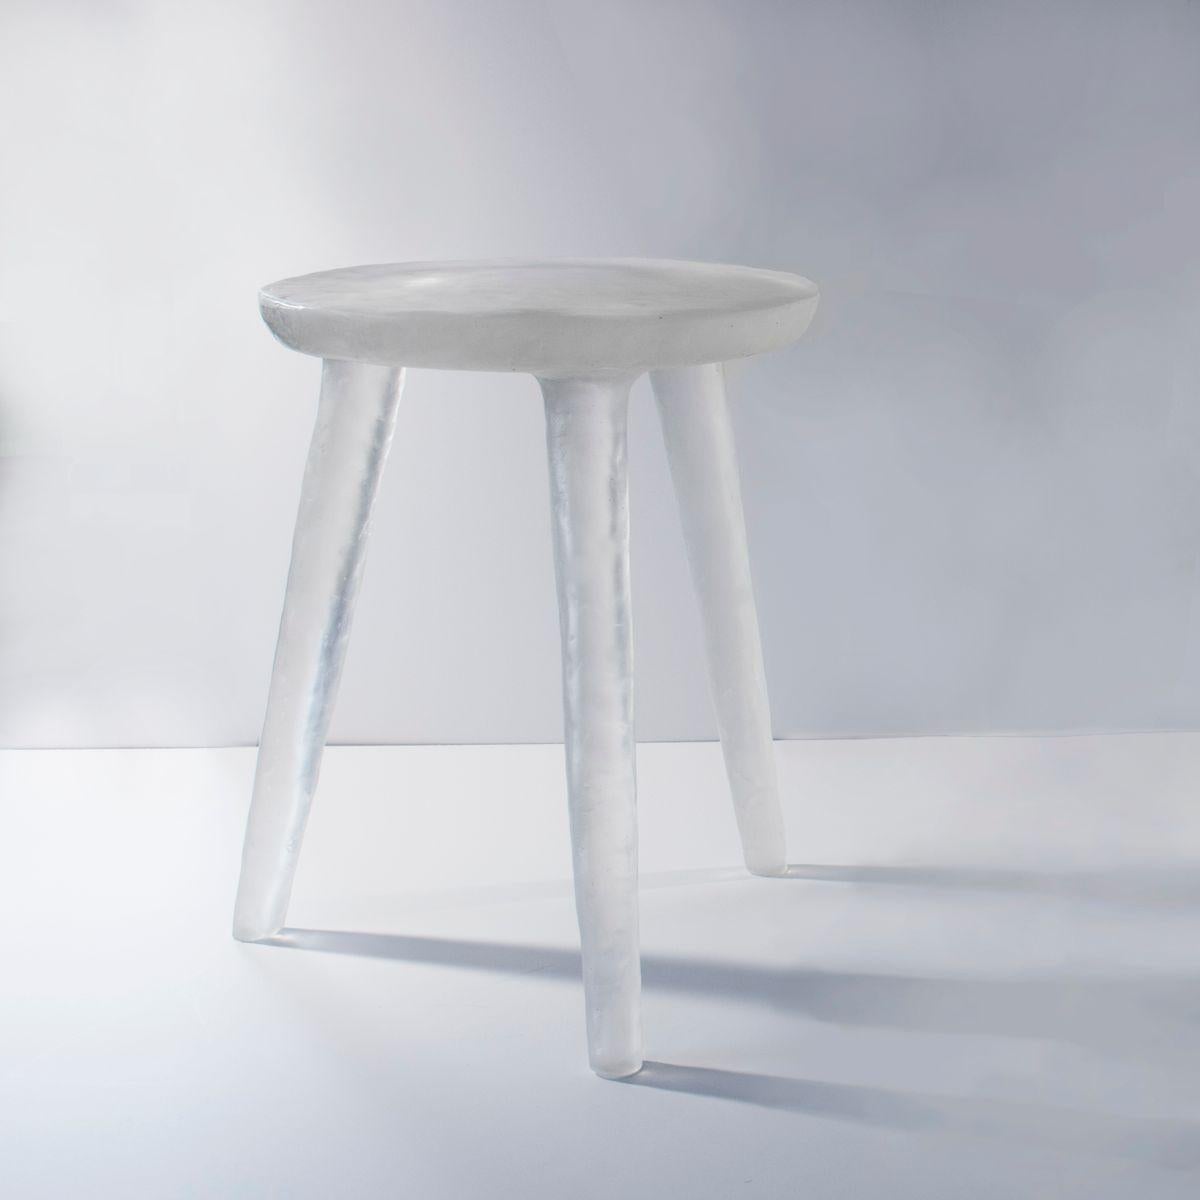 Glow Side Table or Stool 'Periwinkle Purple /Aqua Blue' in Recycled Plastic im Zustand „Neu“ im Angebot in West Hollywood, CA